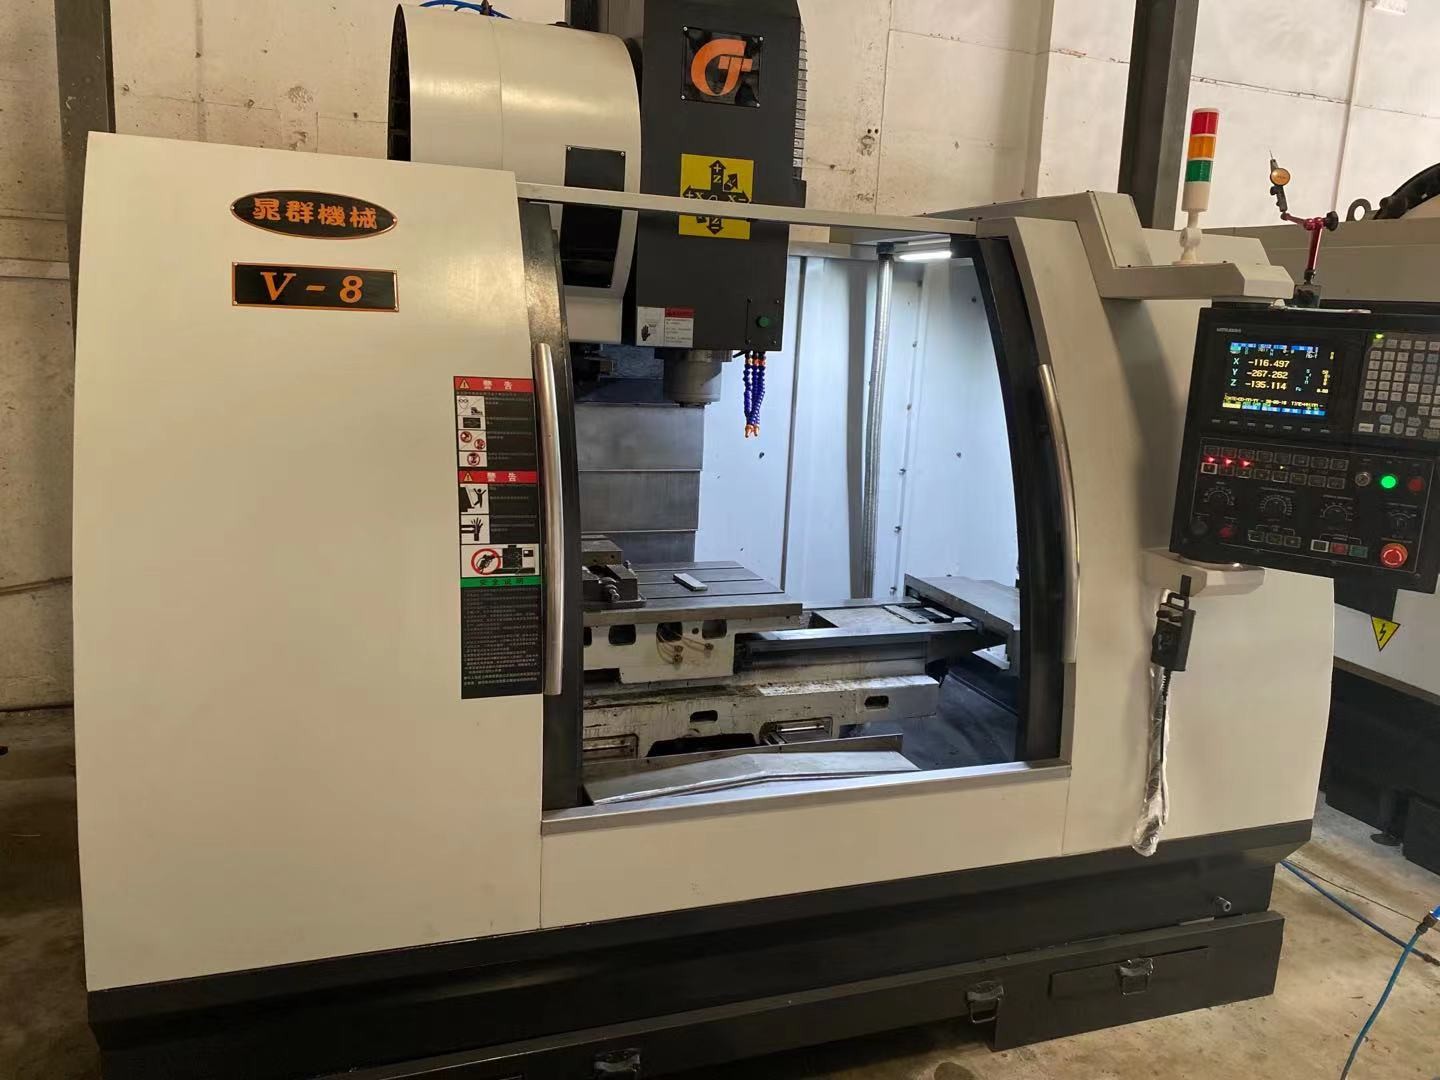  VMC 850 Vertical CNC Machining Center Mitsubishi System 380V 50Hz 3Phases Manufactures